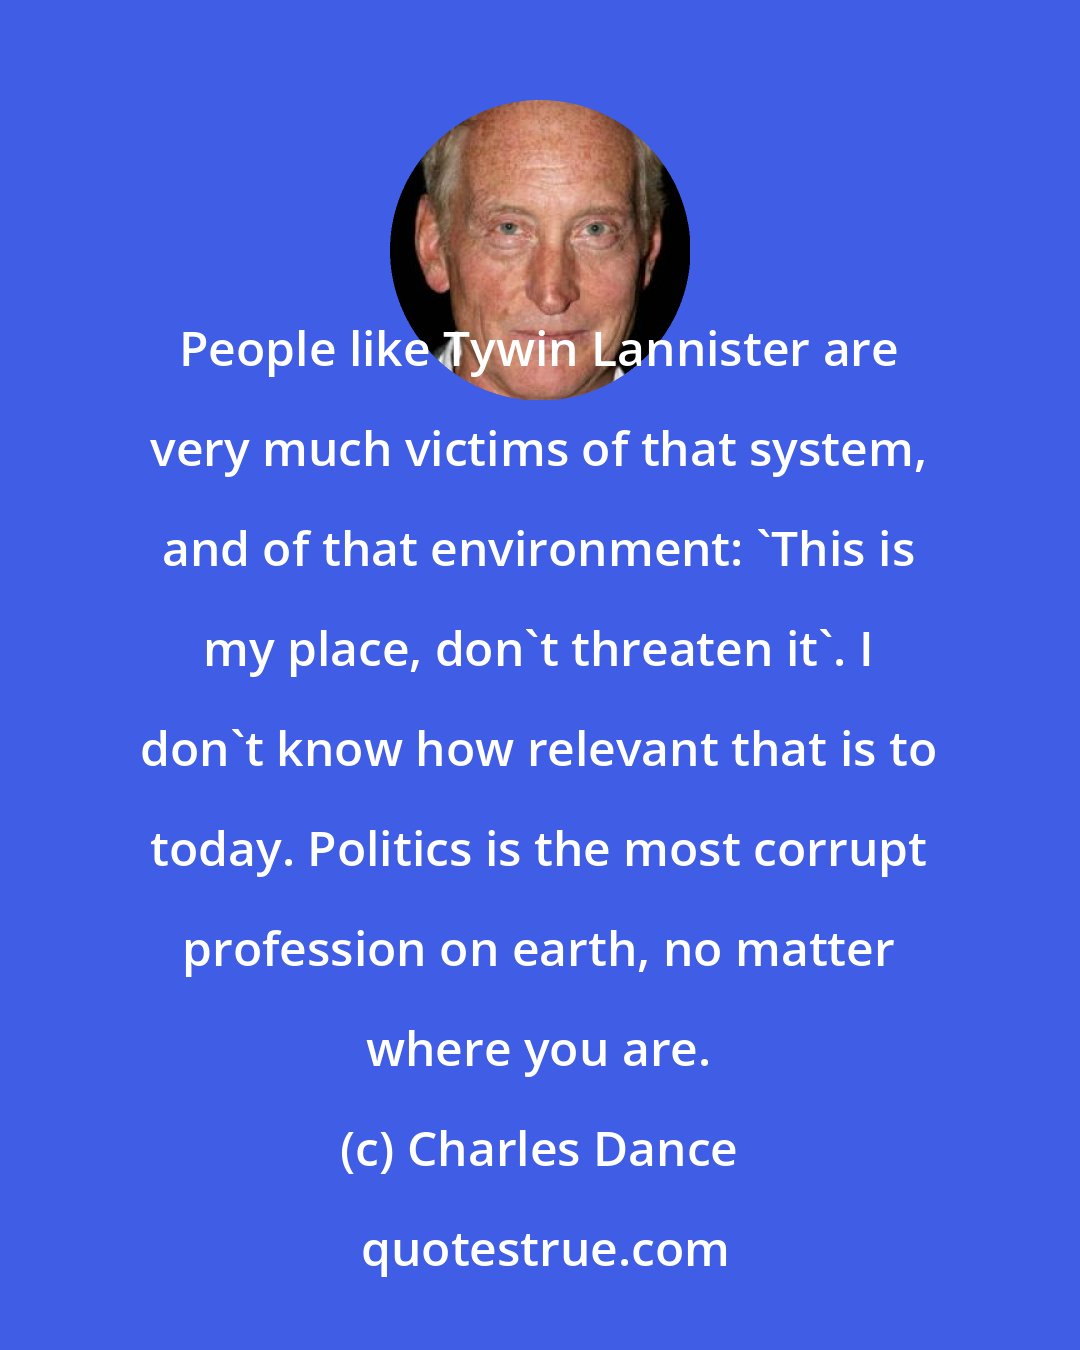 Charles Dance: People like Tywin Lannister are very much victims of that system, and of that environment: 'This is my place, don't threaten it'. I don't know how relevant that is to today. Politics is the most corrupt profession on earth, no matter where you are.